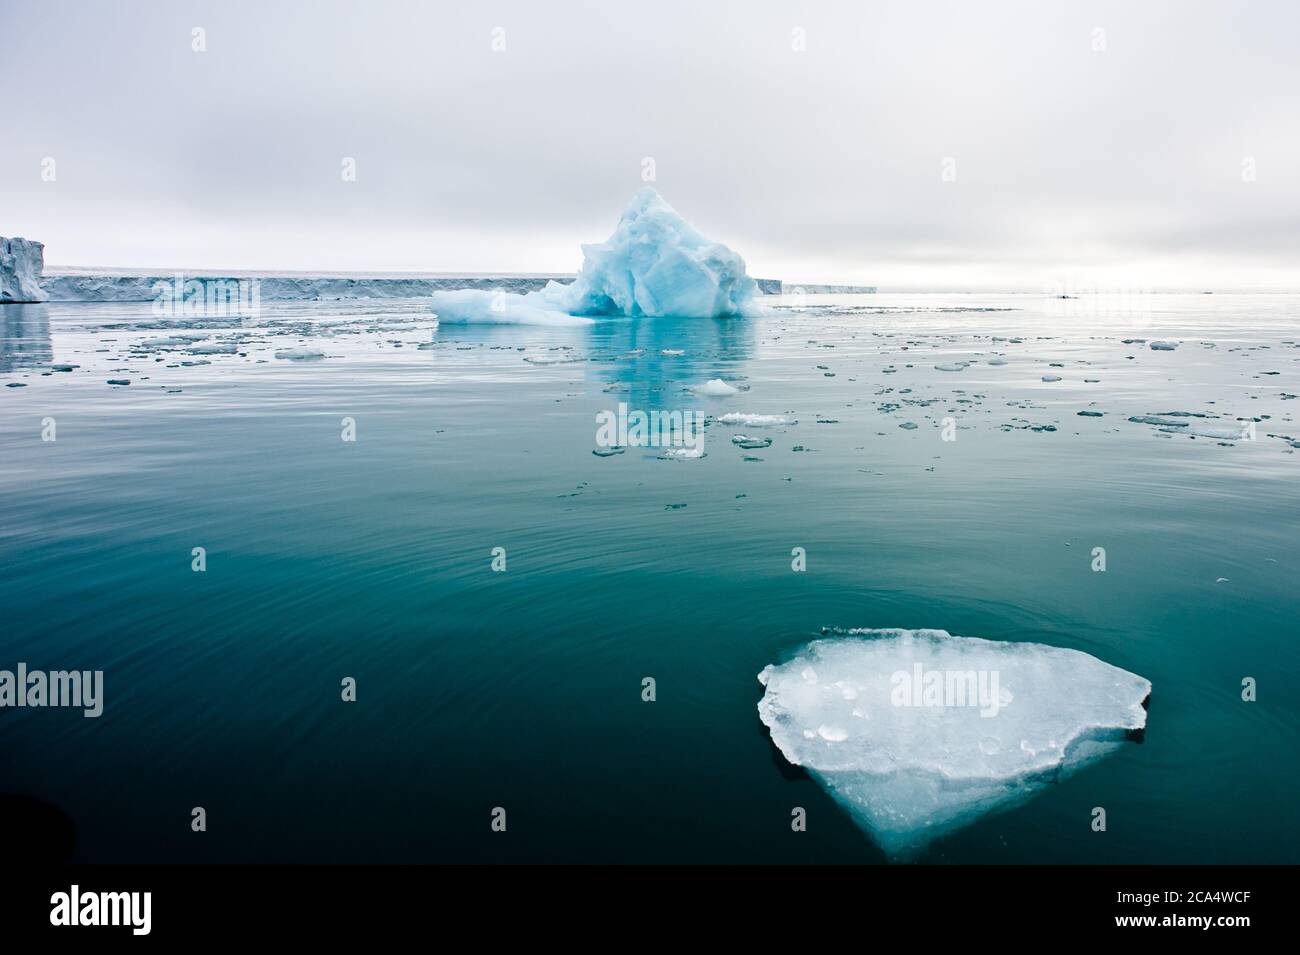 A wide low angle view of melting sea ice floes in still waters of Northern Arctic with iceberg and glacial wall in background.Climate Crisis and Break Stock Photo